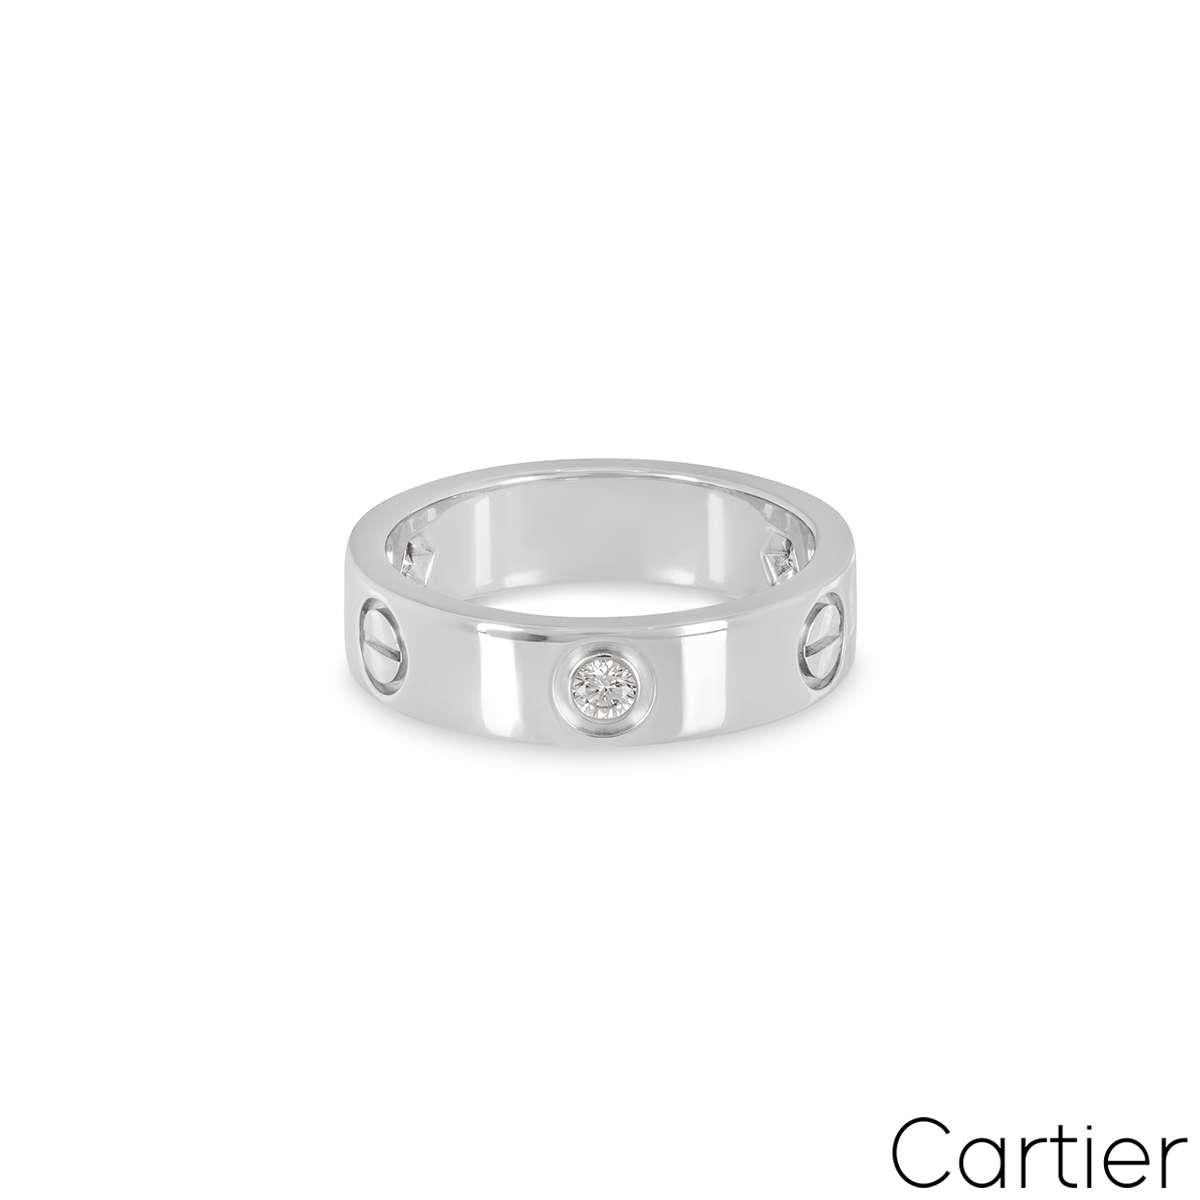 Round Cut Cartier White Gold Half Diamond Love Ring Size 52 B4032500 For Sale